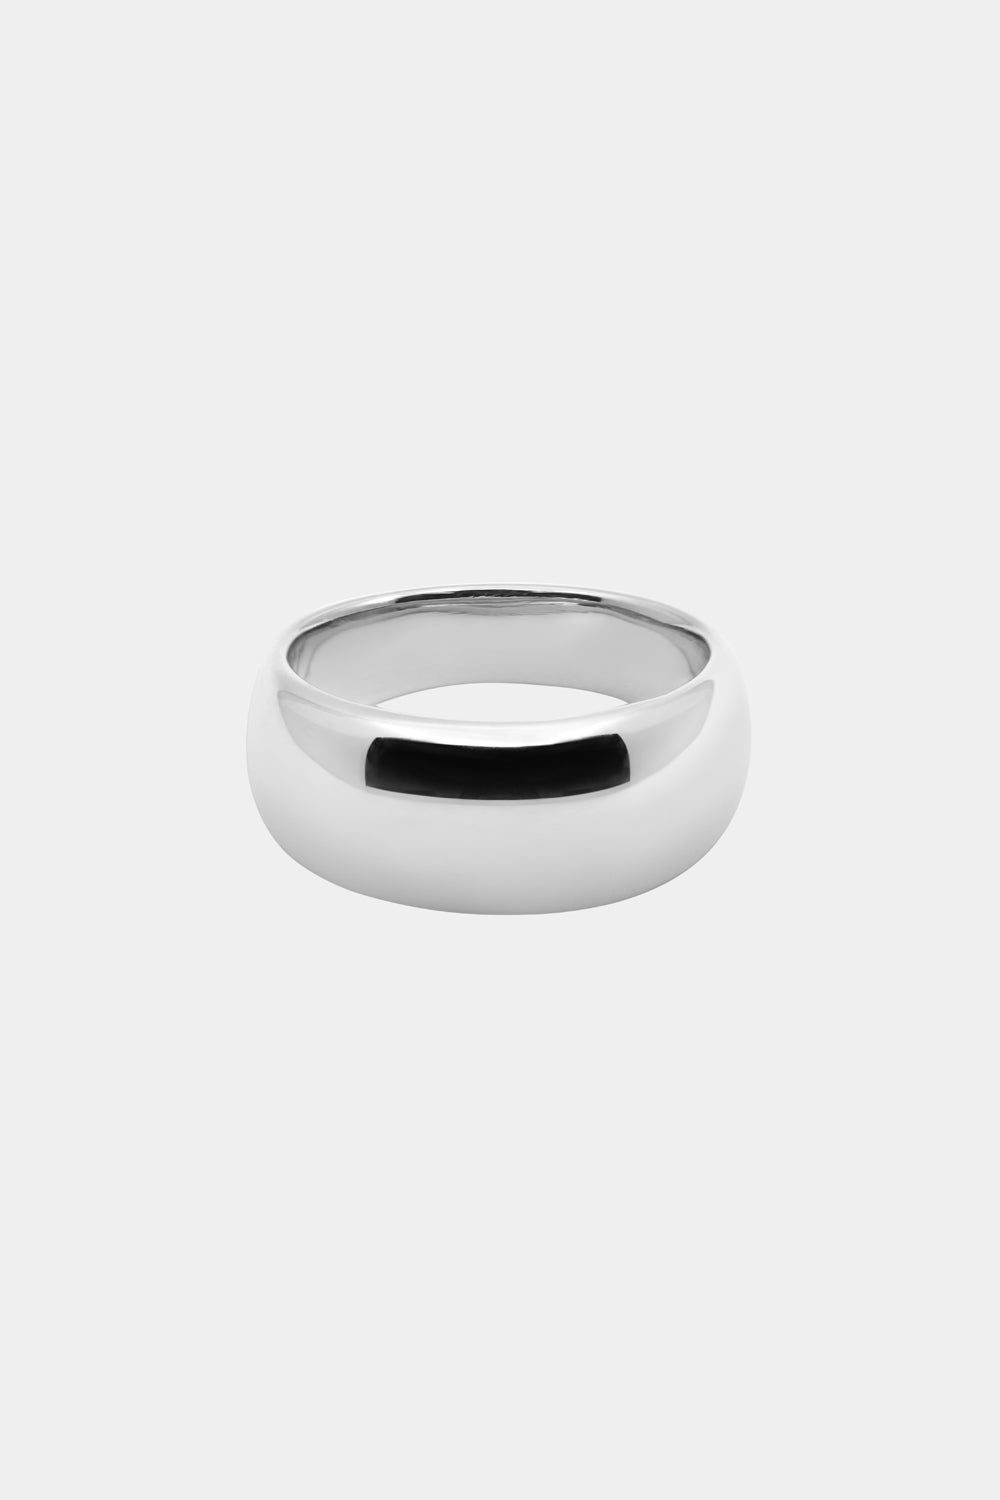 Blob Ring | Silver or White Gold, More options available| Natasha Schweitzer